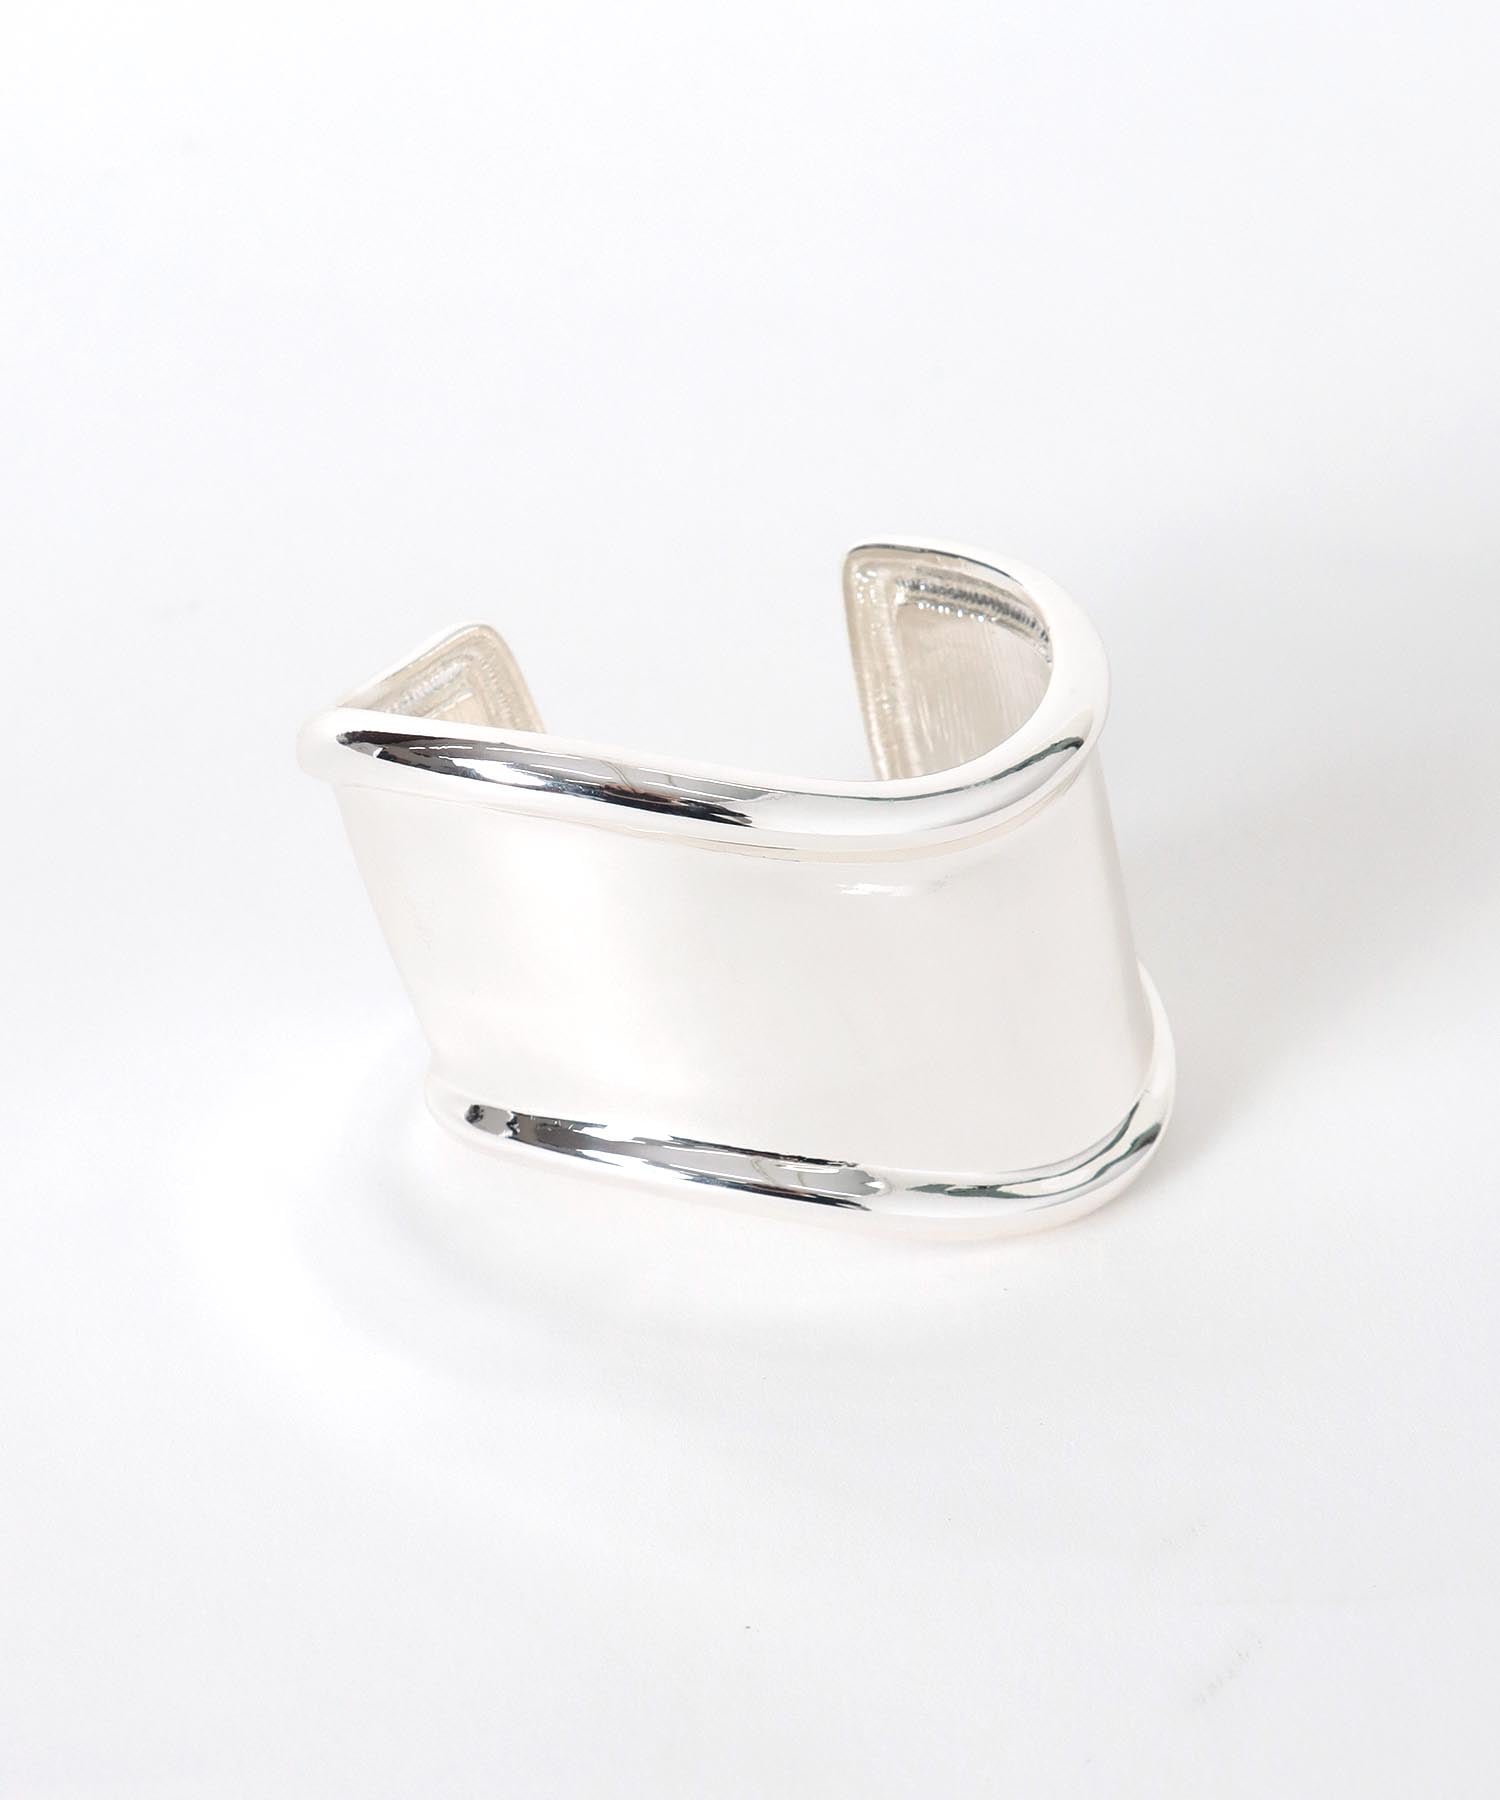 SALEHOT】 バングル 「Nothing And Others/ナッシングアンドアザーズ」Curve Point Bangle ZOZOTOWN  PayPayモール店 通販 PayPayモール